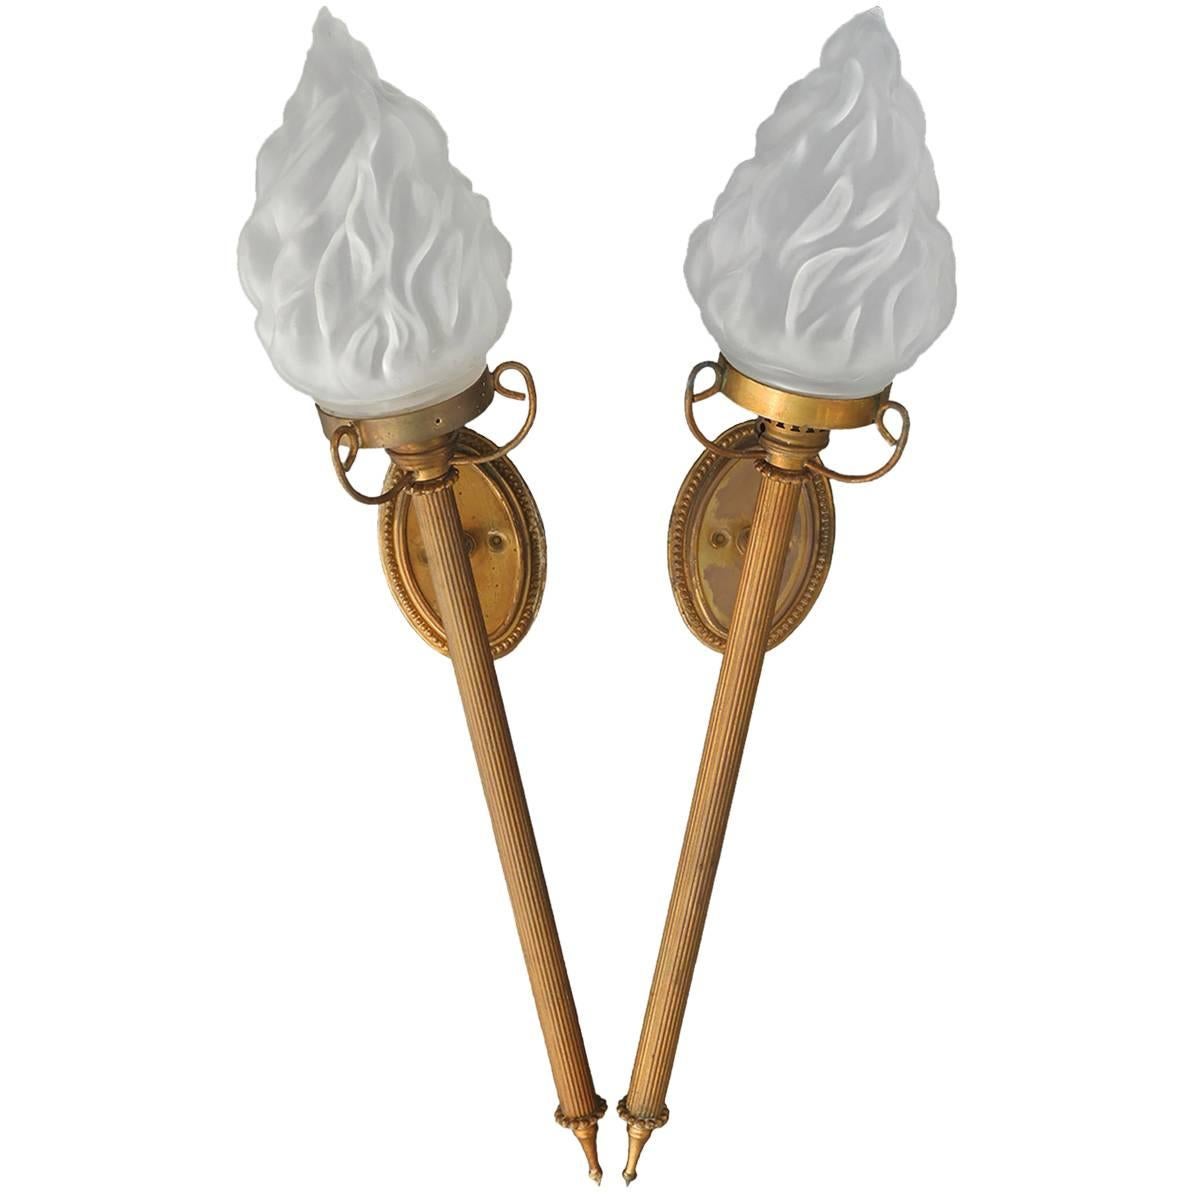 Pair of Torchere Wall Lights French Flame Glass Shades Sconces, circa 1910